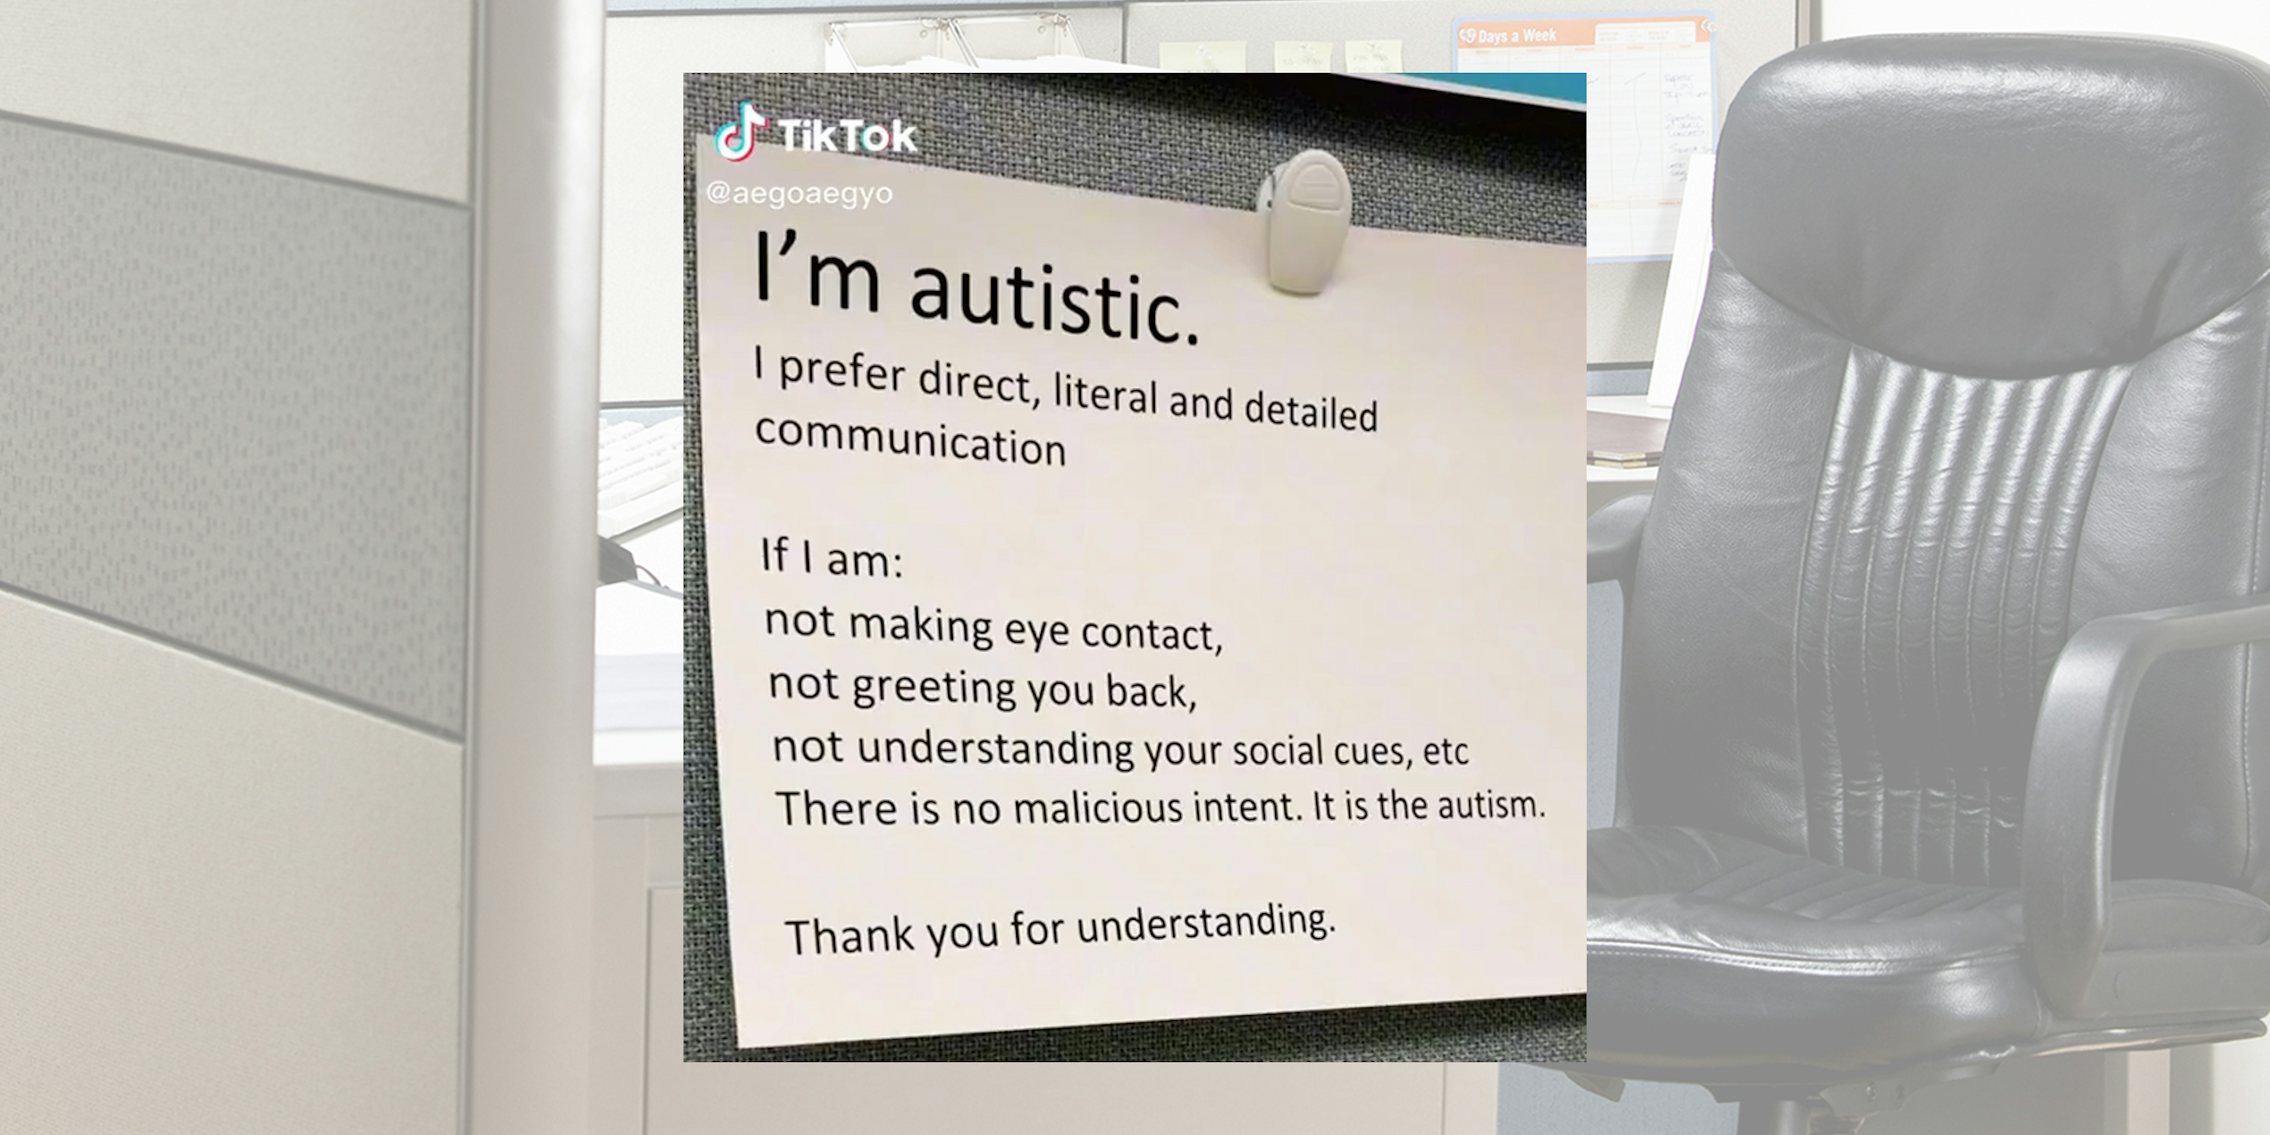 office cubicle background with sign inset 'I'm autistic. I prefer direct, literal and detailed communication. If I am: not making eye contact, not greeting you back, not understanding your social cues, etc. There is no malicious intent. It is the autism. Thank you for understanding.'